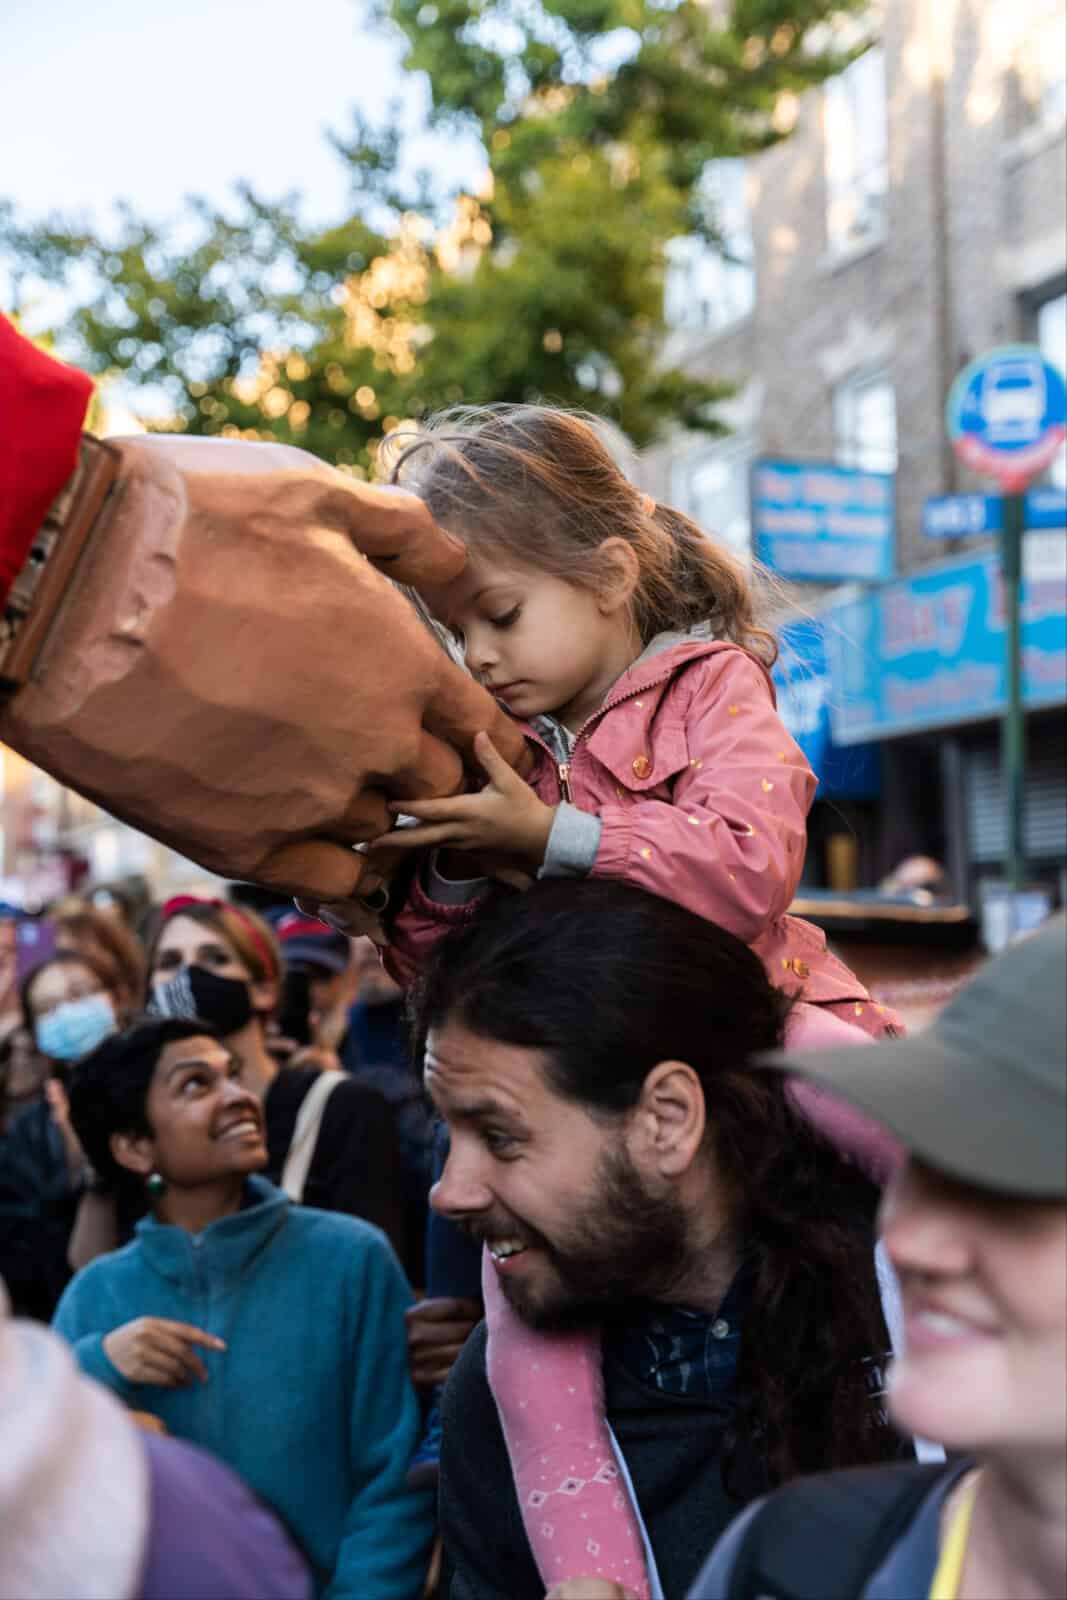 Amal meets a young girl sitting on her father's shoulders in Bay Ridge, N.Y. - Press photo courtesy of The Walk Productions